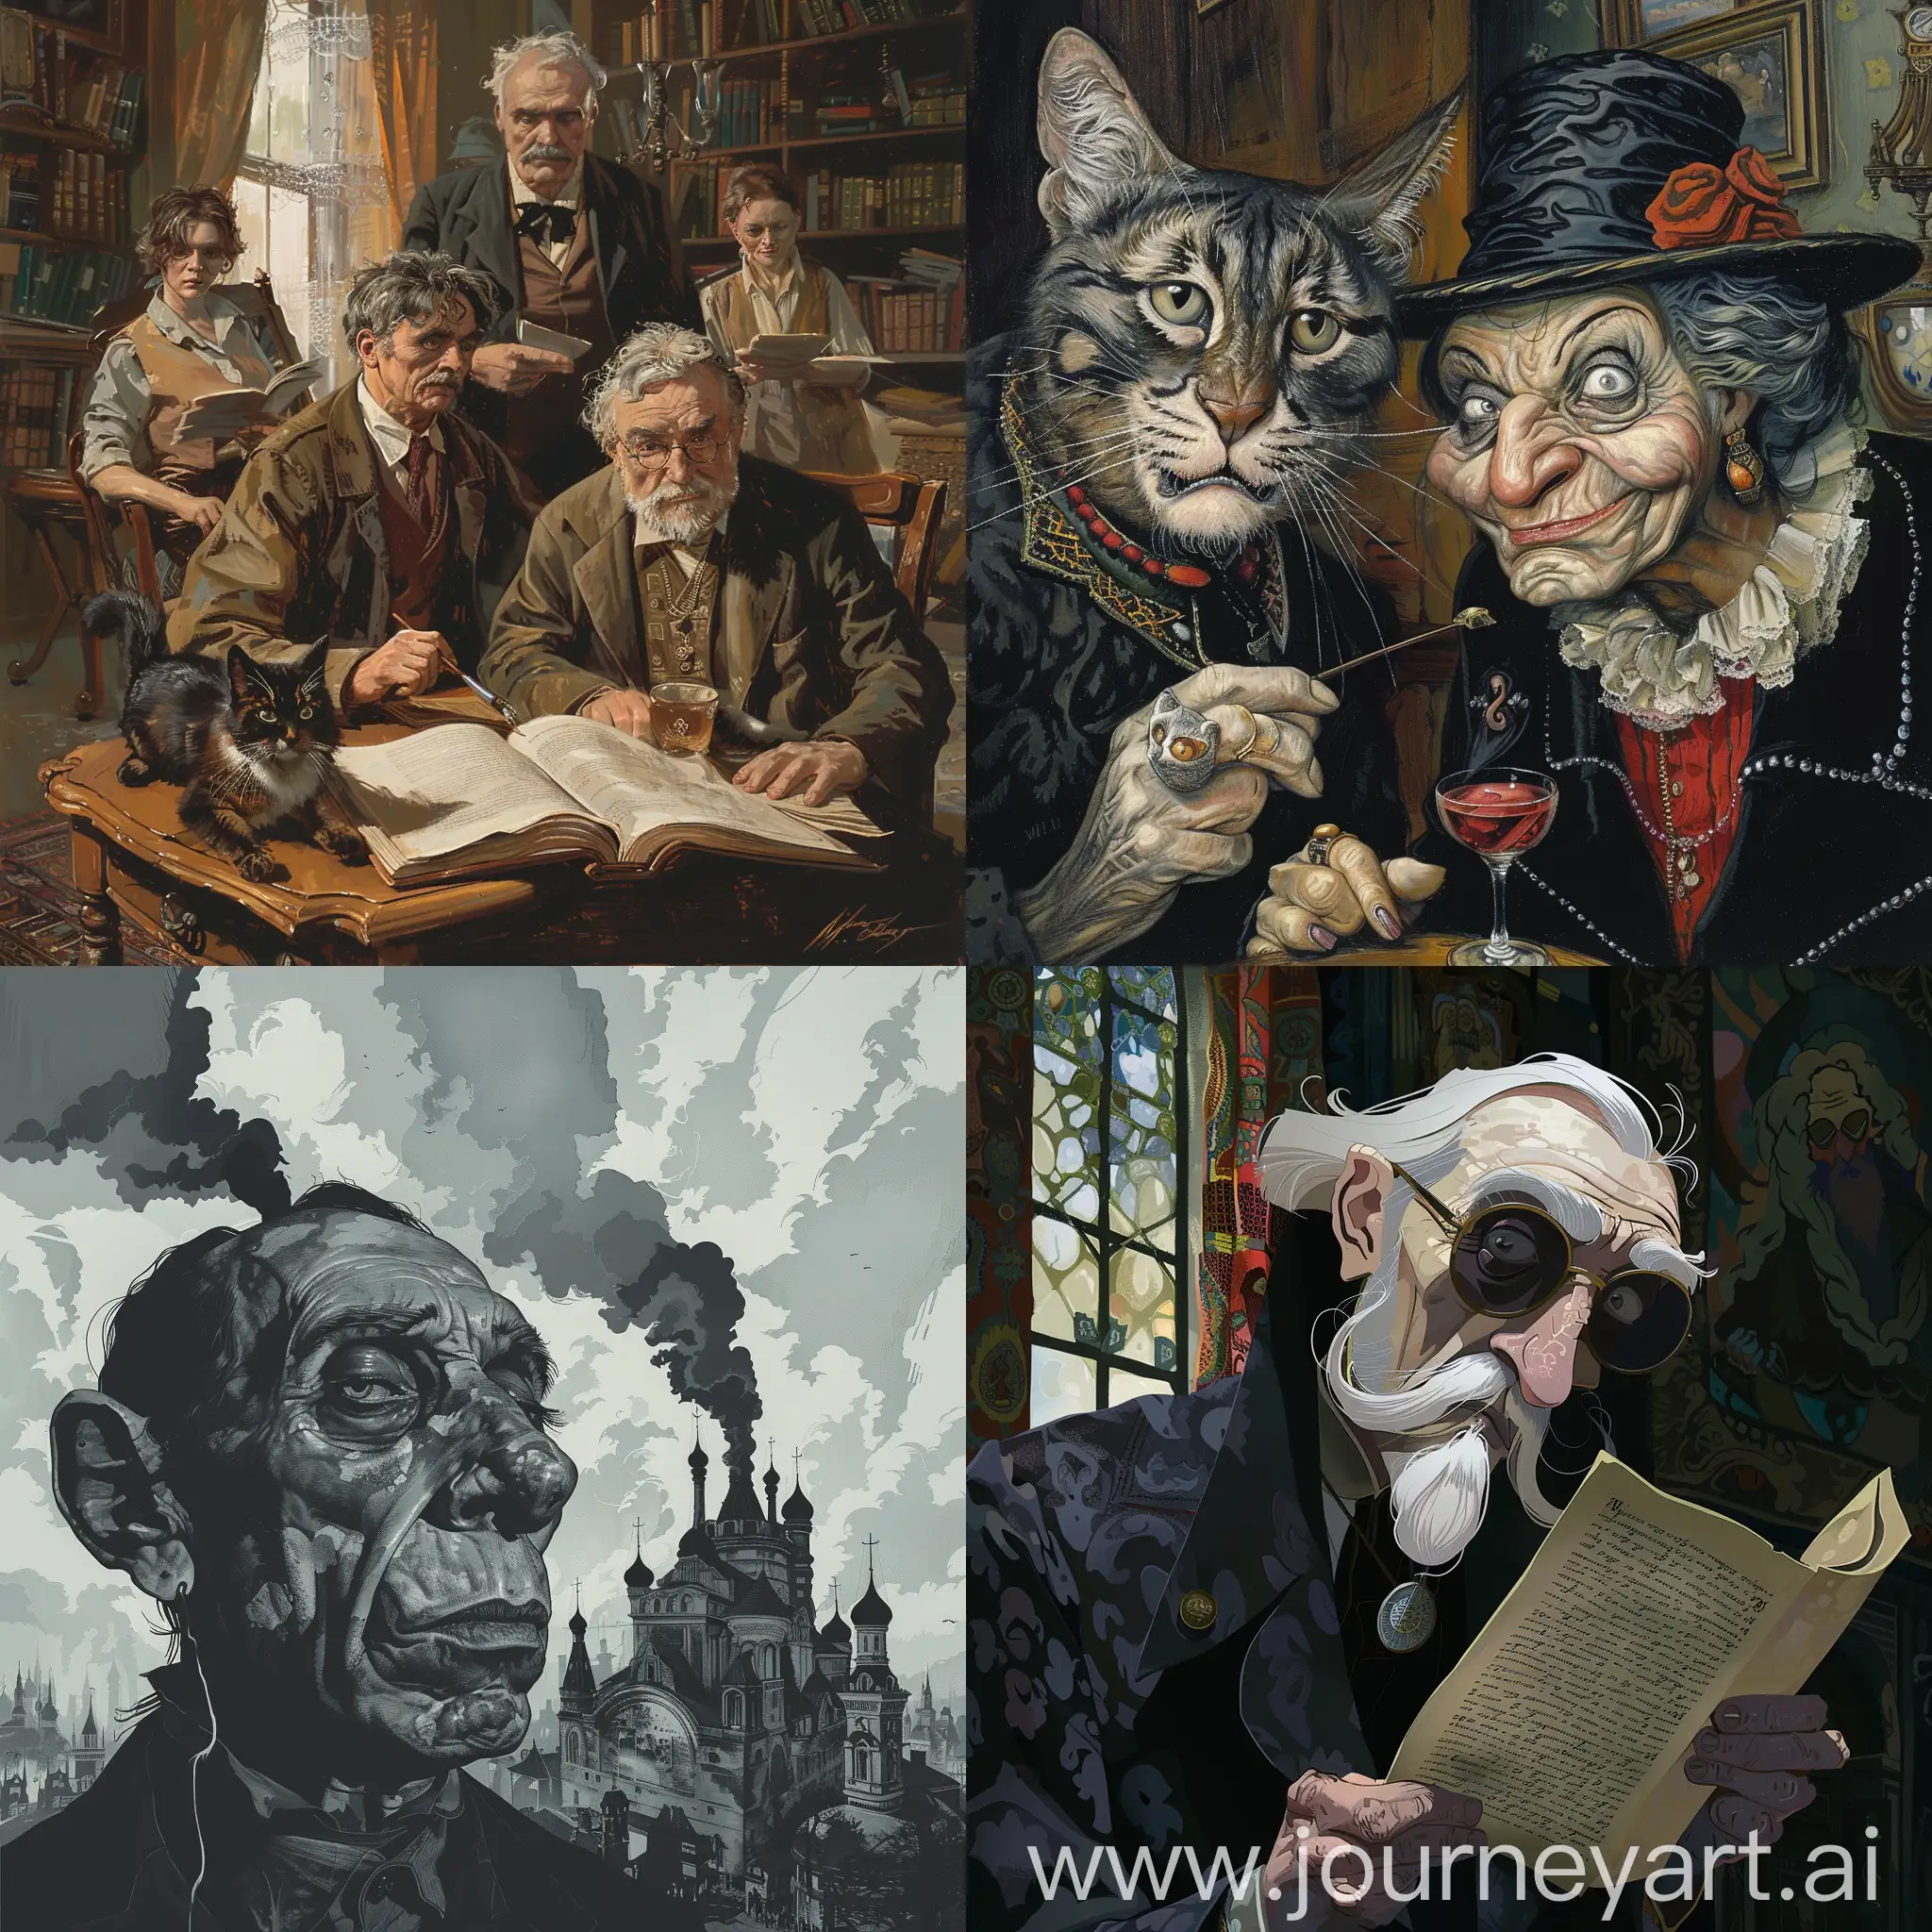 Vivid-Illustrations-of-Master-and-Margarita-Characters-by-M-A-Bulgakov